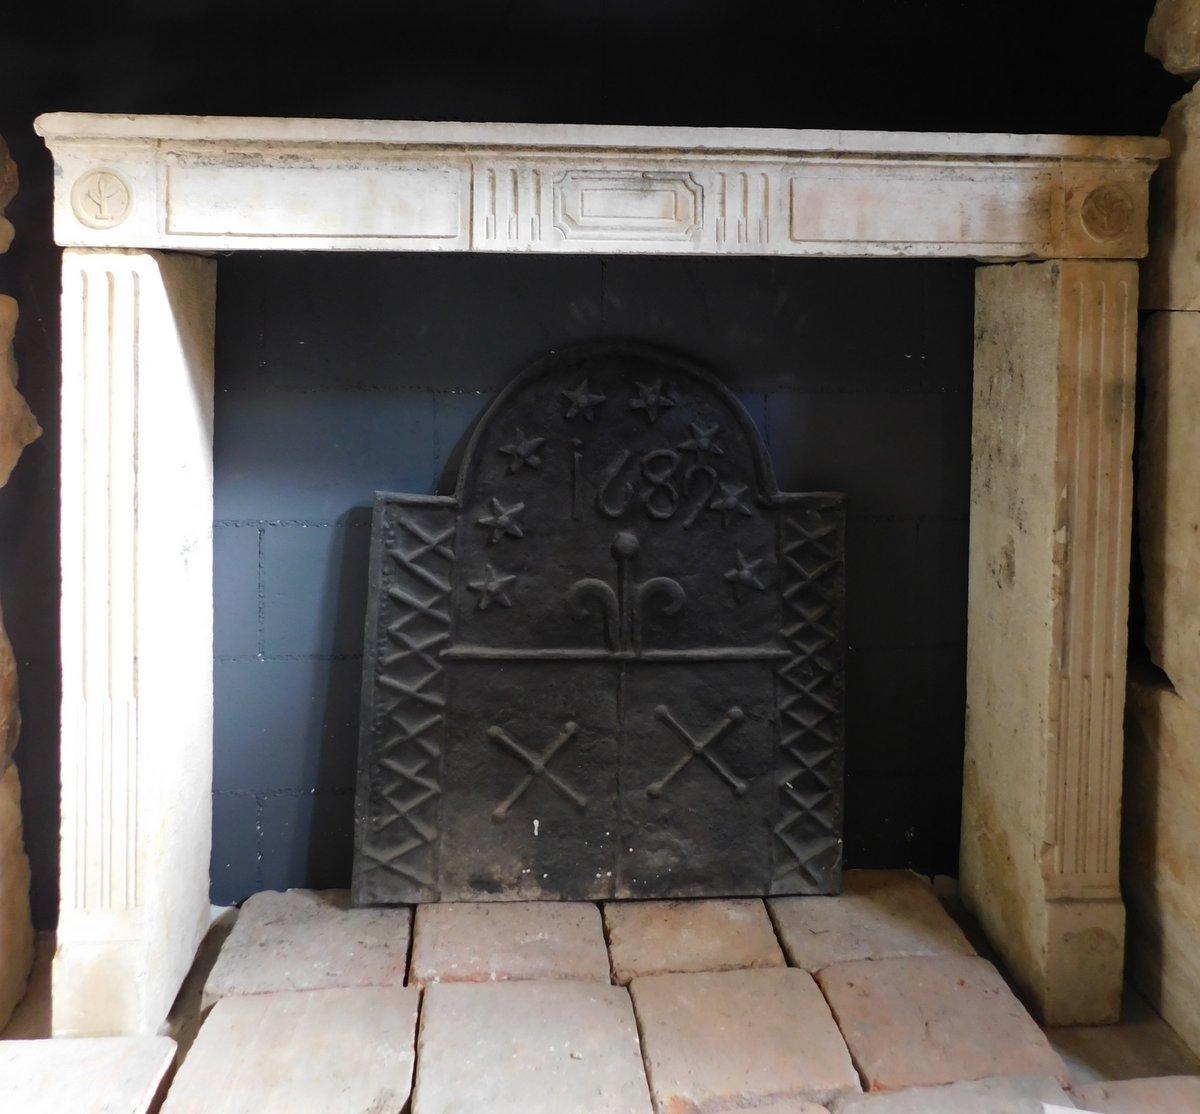 Antique Carved stone fireplace, small in size and with geometric carvings, so adaptable to any interior both com estile and as a size, both classic elegant and rustic, maximum external size L 140 X H 116 X D 33 cm, mouth size L 113 X H 100 cm